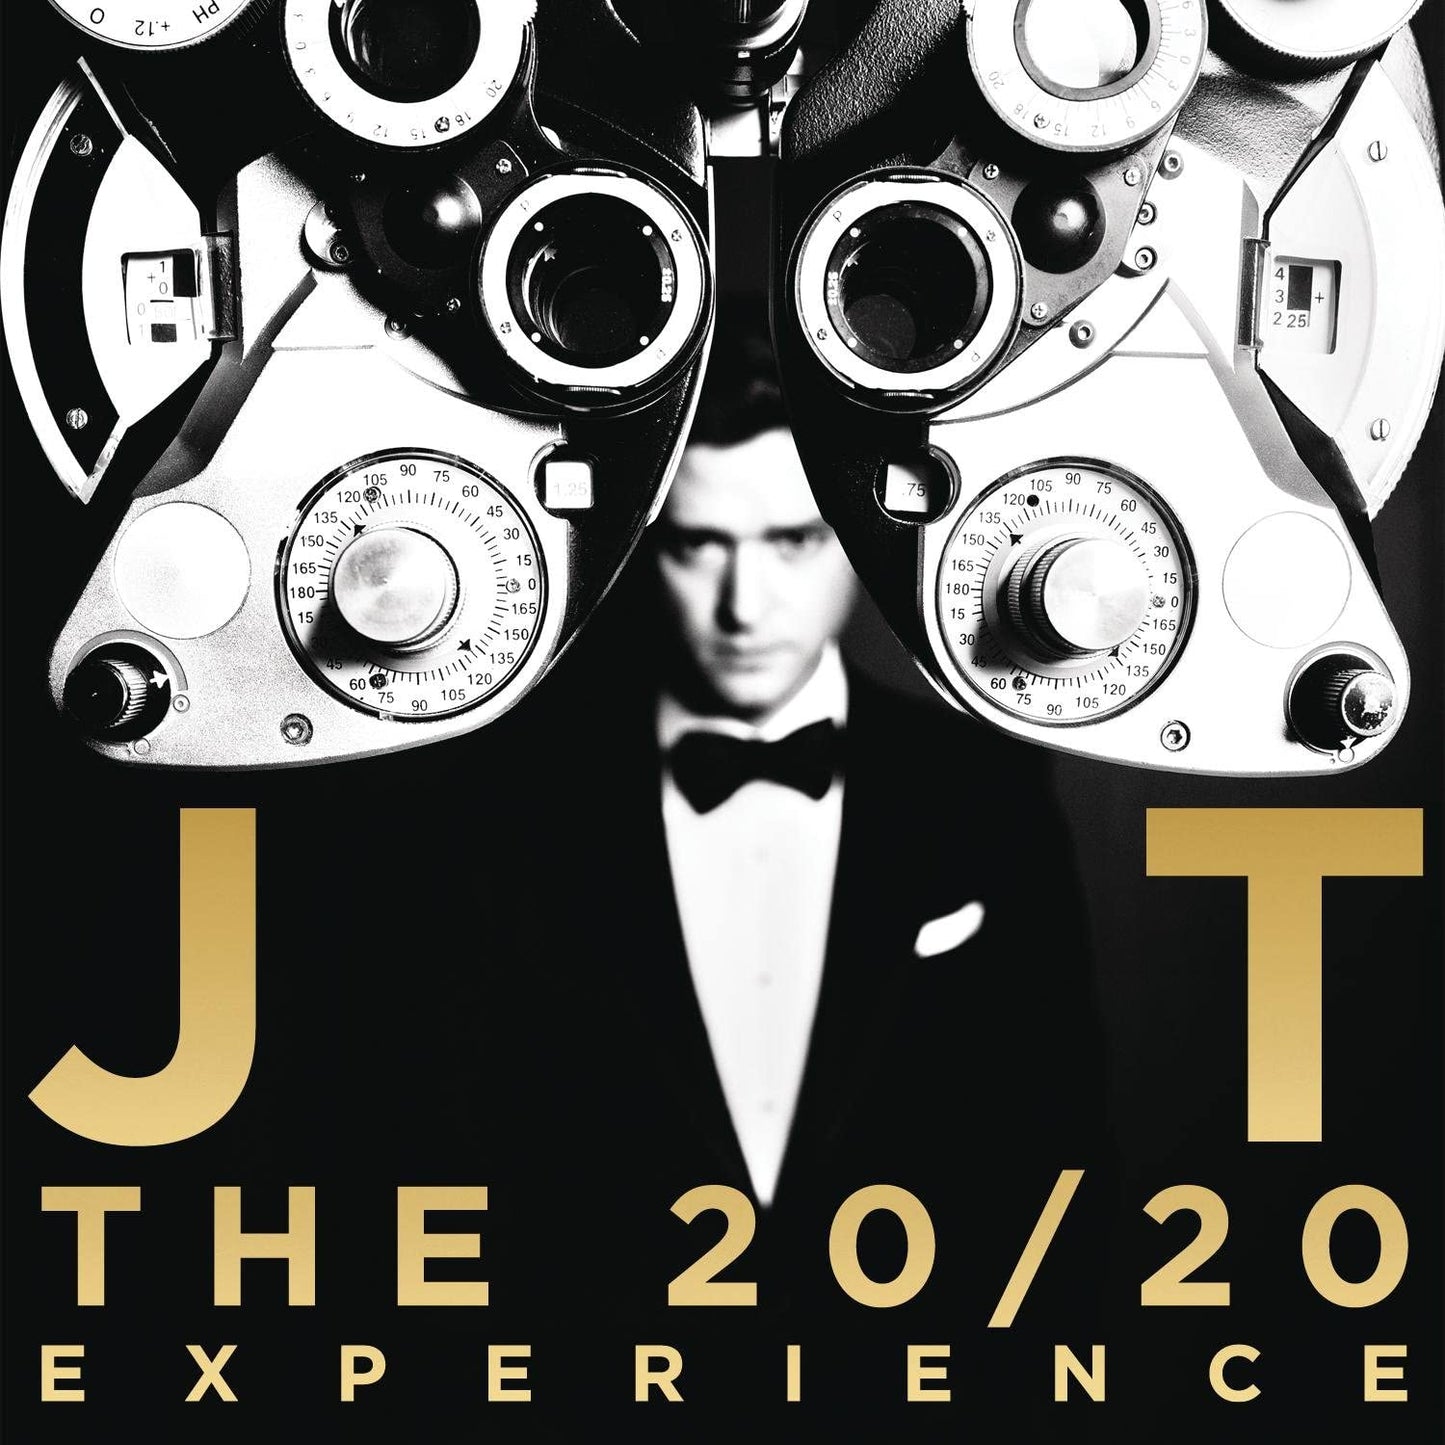 Justin Timberlake – The 20/20 Experience -USED CD